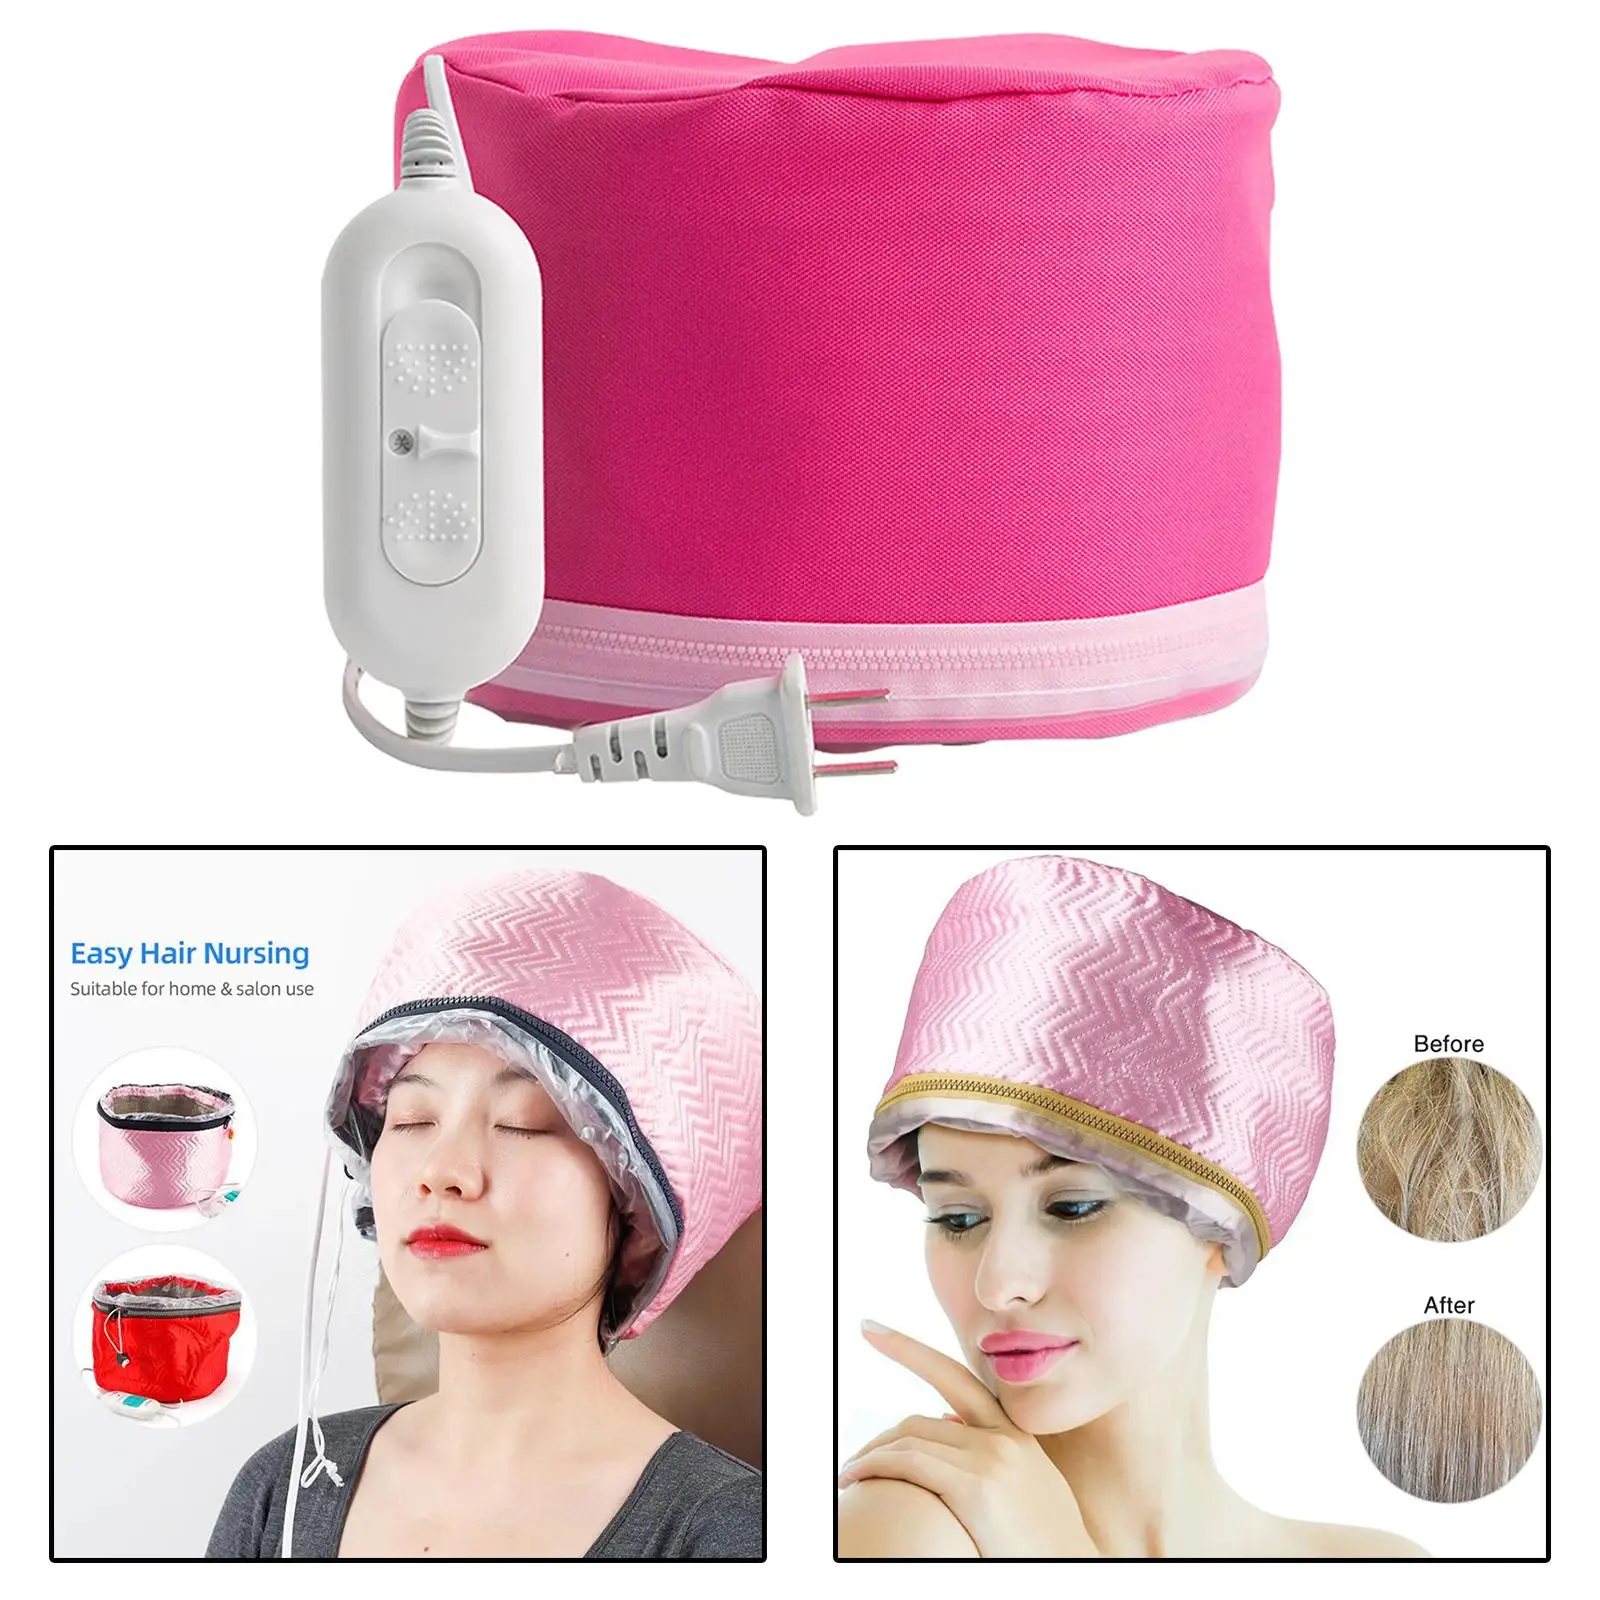 Hair Heating Caps Steamer 3-Mode Adjustable Thermal Heat Caps Dryers for Deep Conditioning Home Salon Travel Hair SPA Nourishing